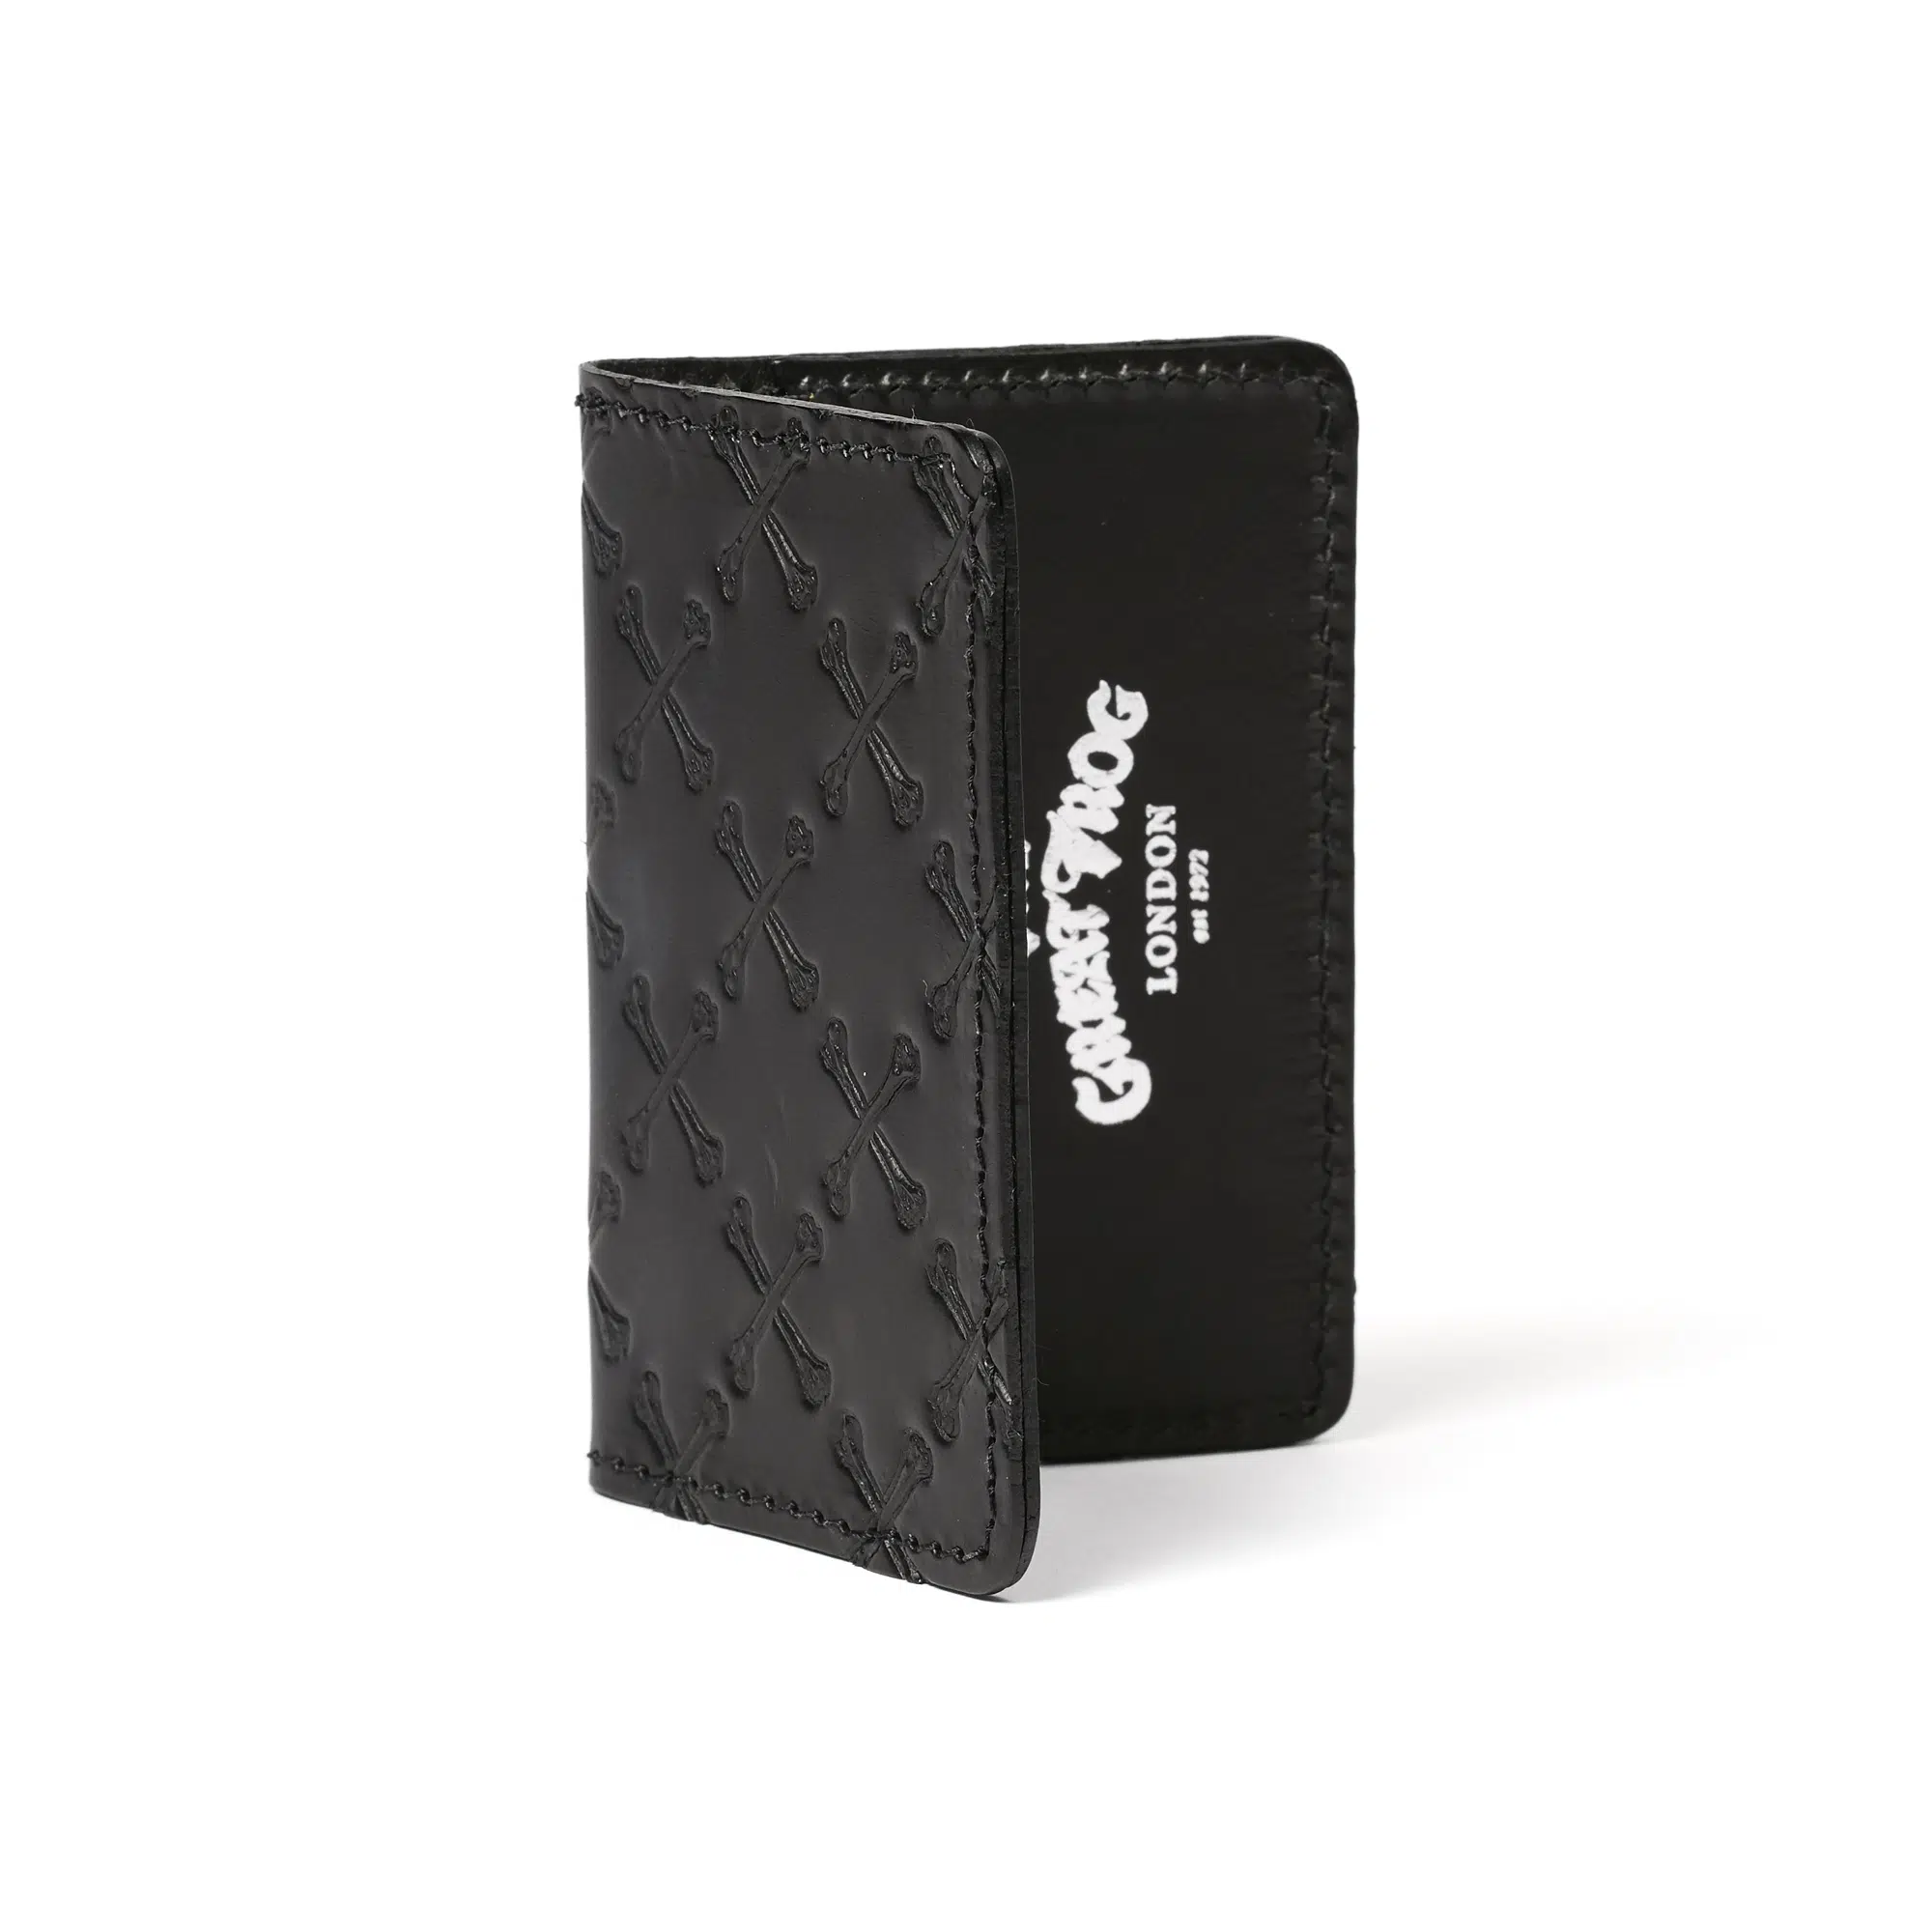 Leather Monogram Wallet - The Great Frog London - USA